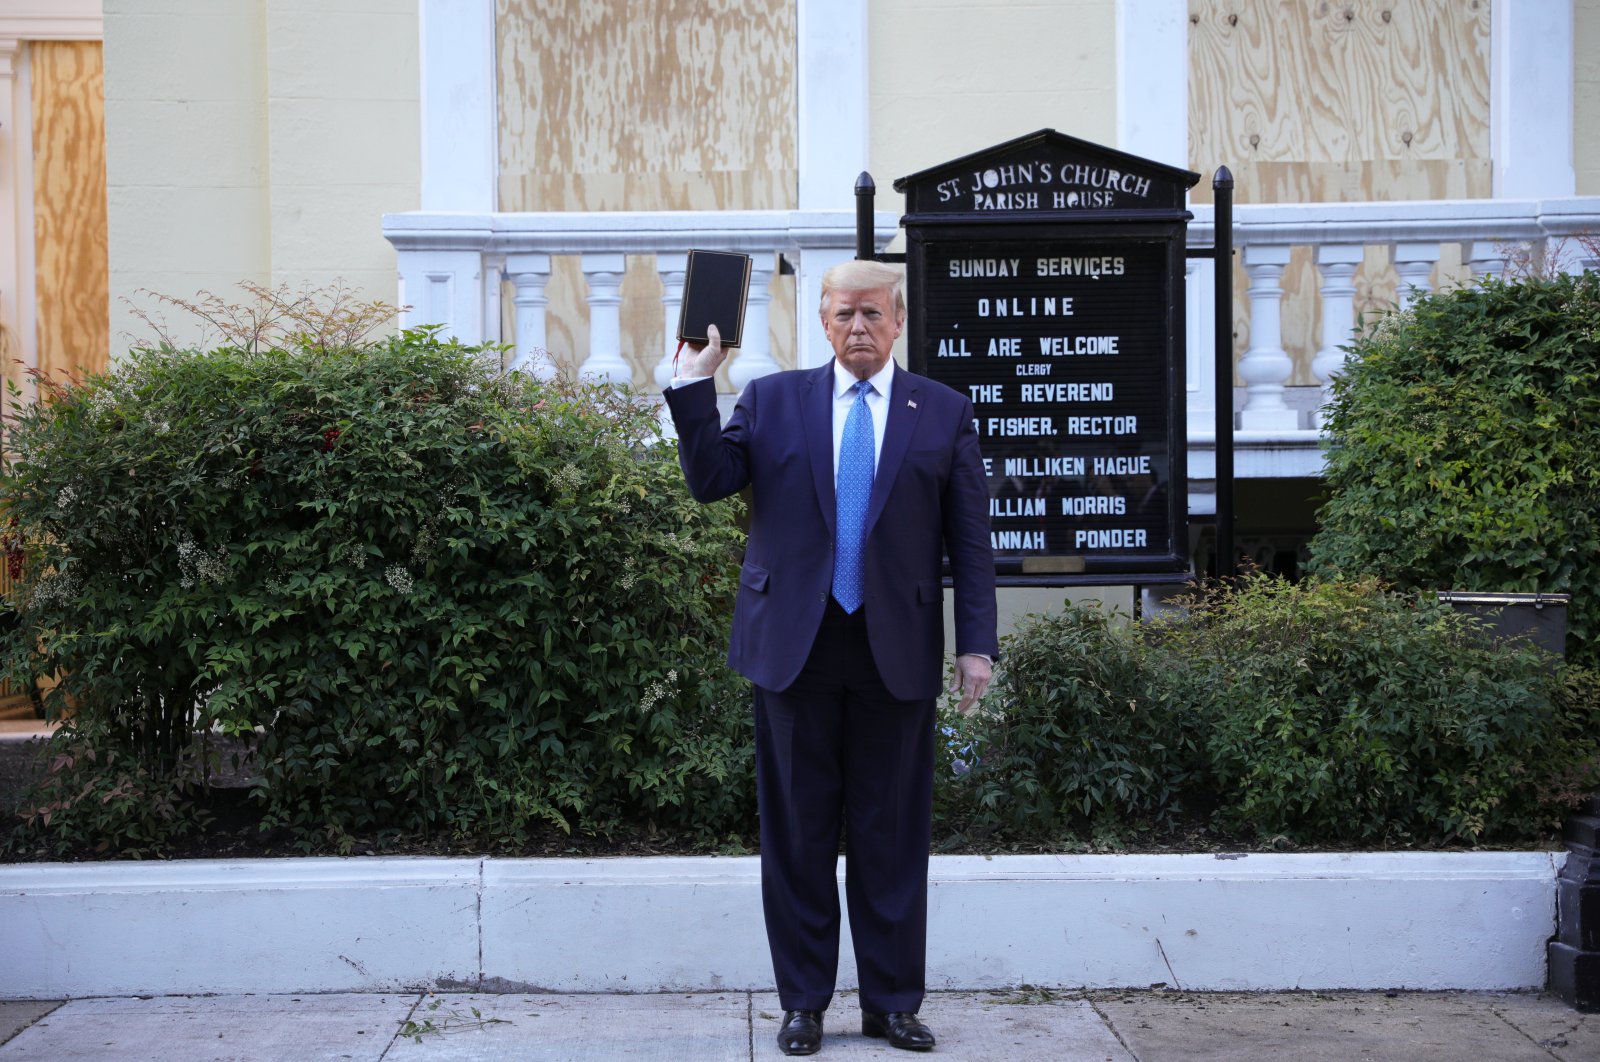 U.S. President Donald Trump holds up a Bible as he stands in front of St. John's Episcopal Church across from the White House after walking there for a photo opportunity during ongoing protests over racial inequality in the wake of the death of George Floyd while in Minneapolis police custody, at the White House in Washington, U.S., June 1, 2020. (Reuters Photo)